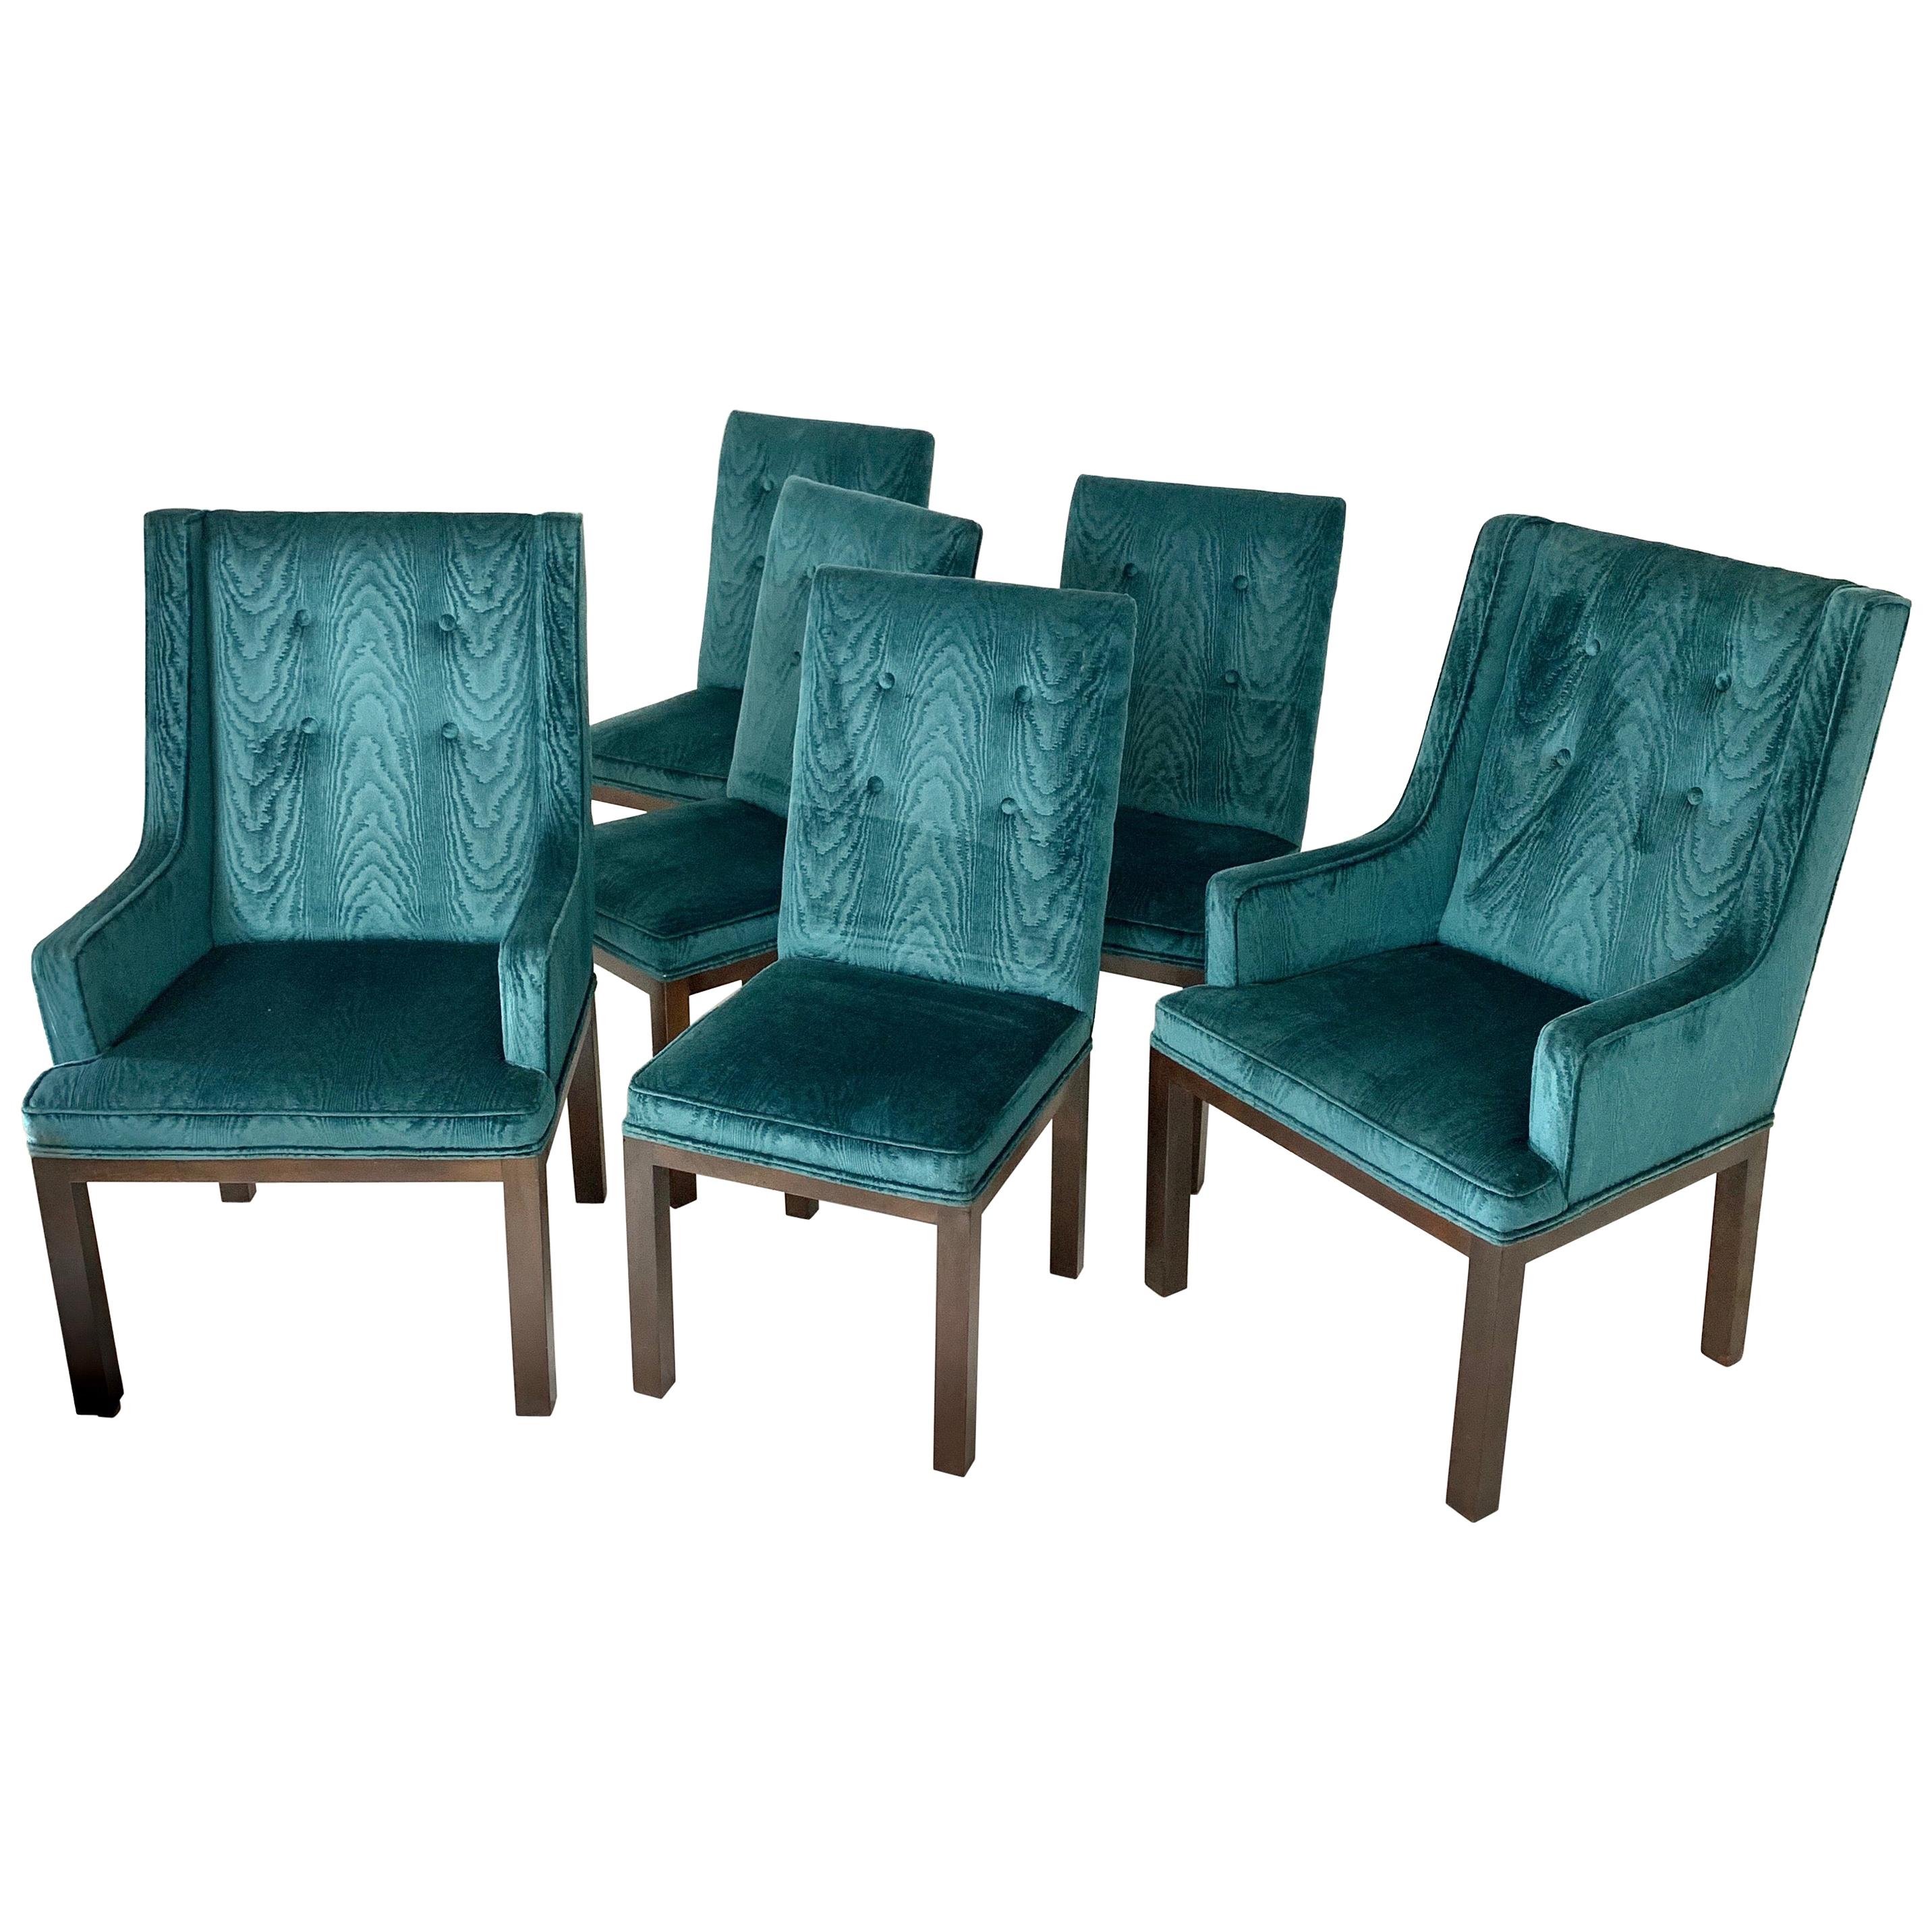 Set of 6 John Widdicomb Tufted Textured Velvet Parsons Dining and Armchairs